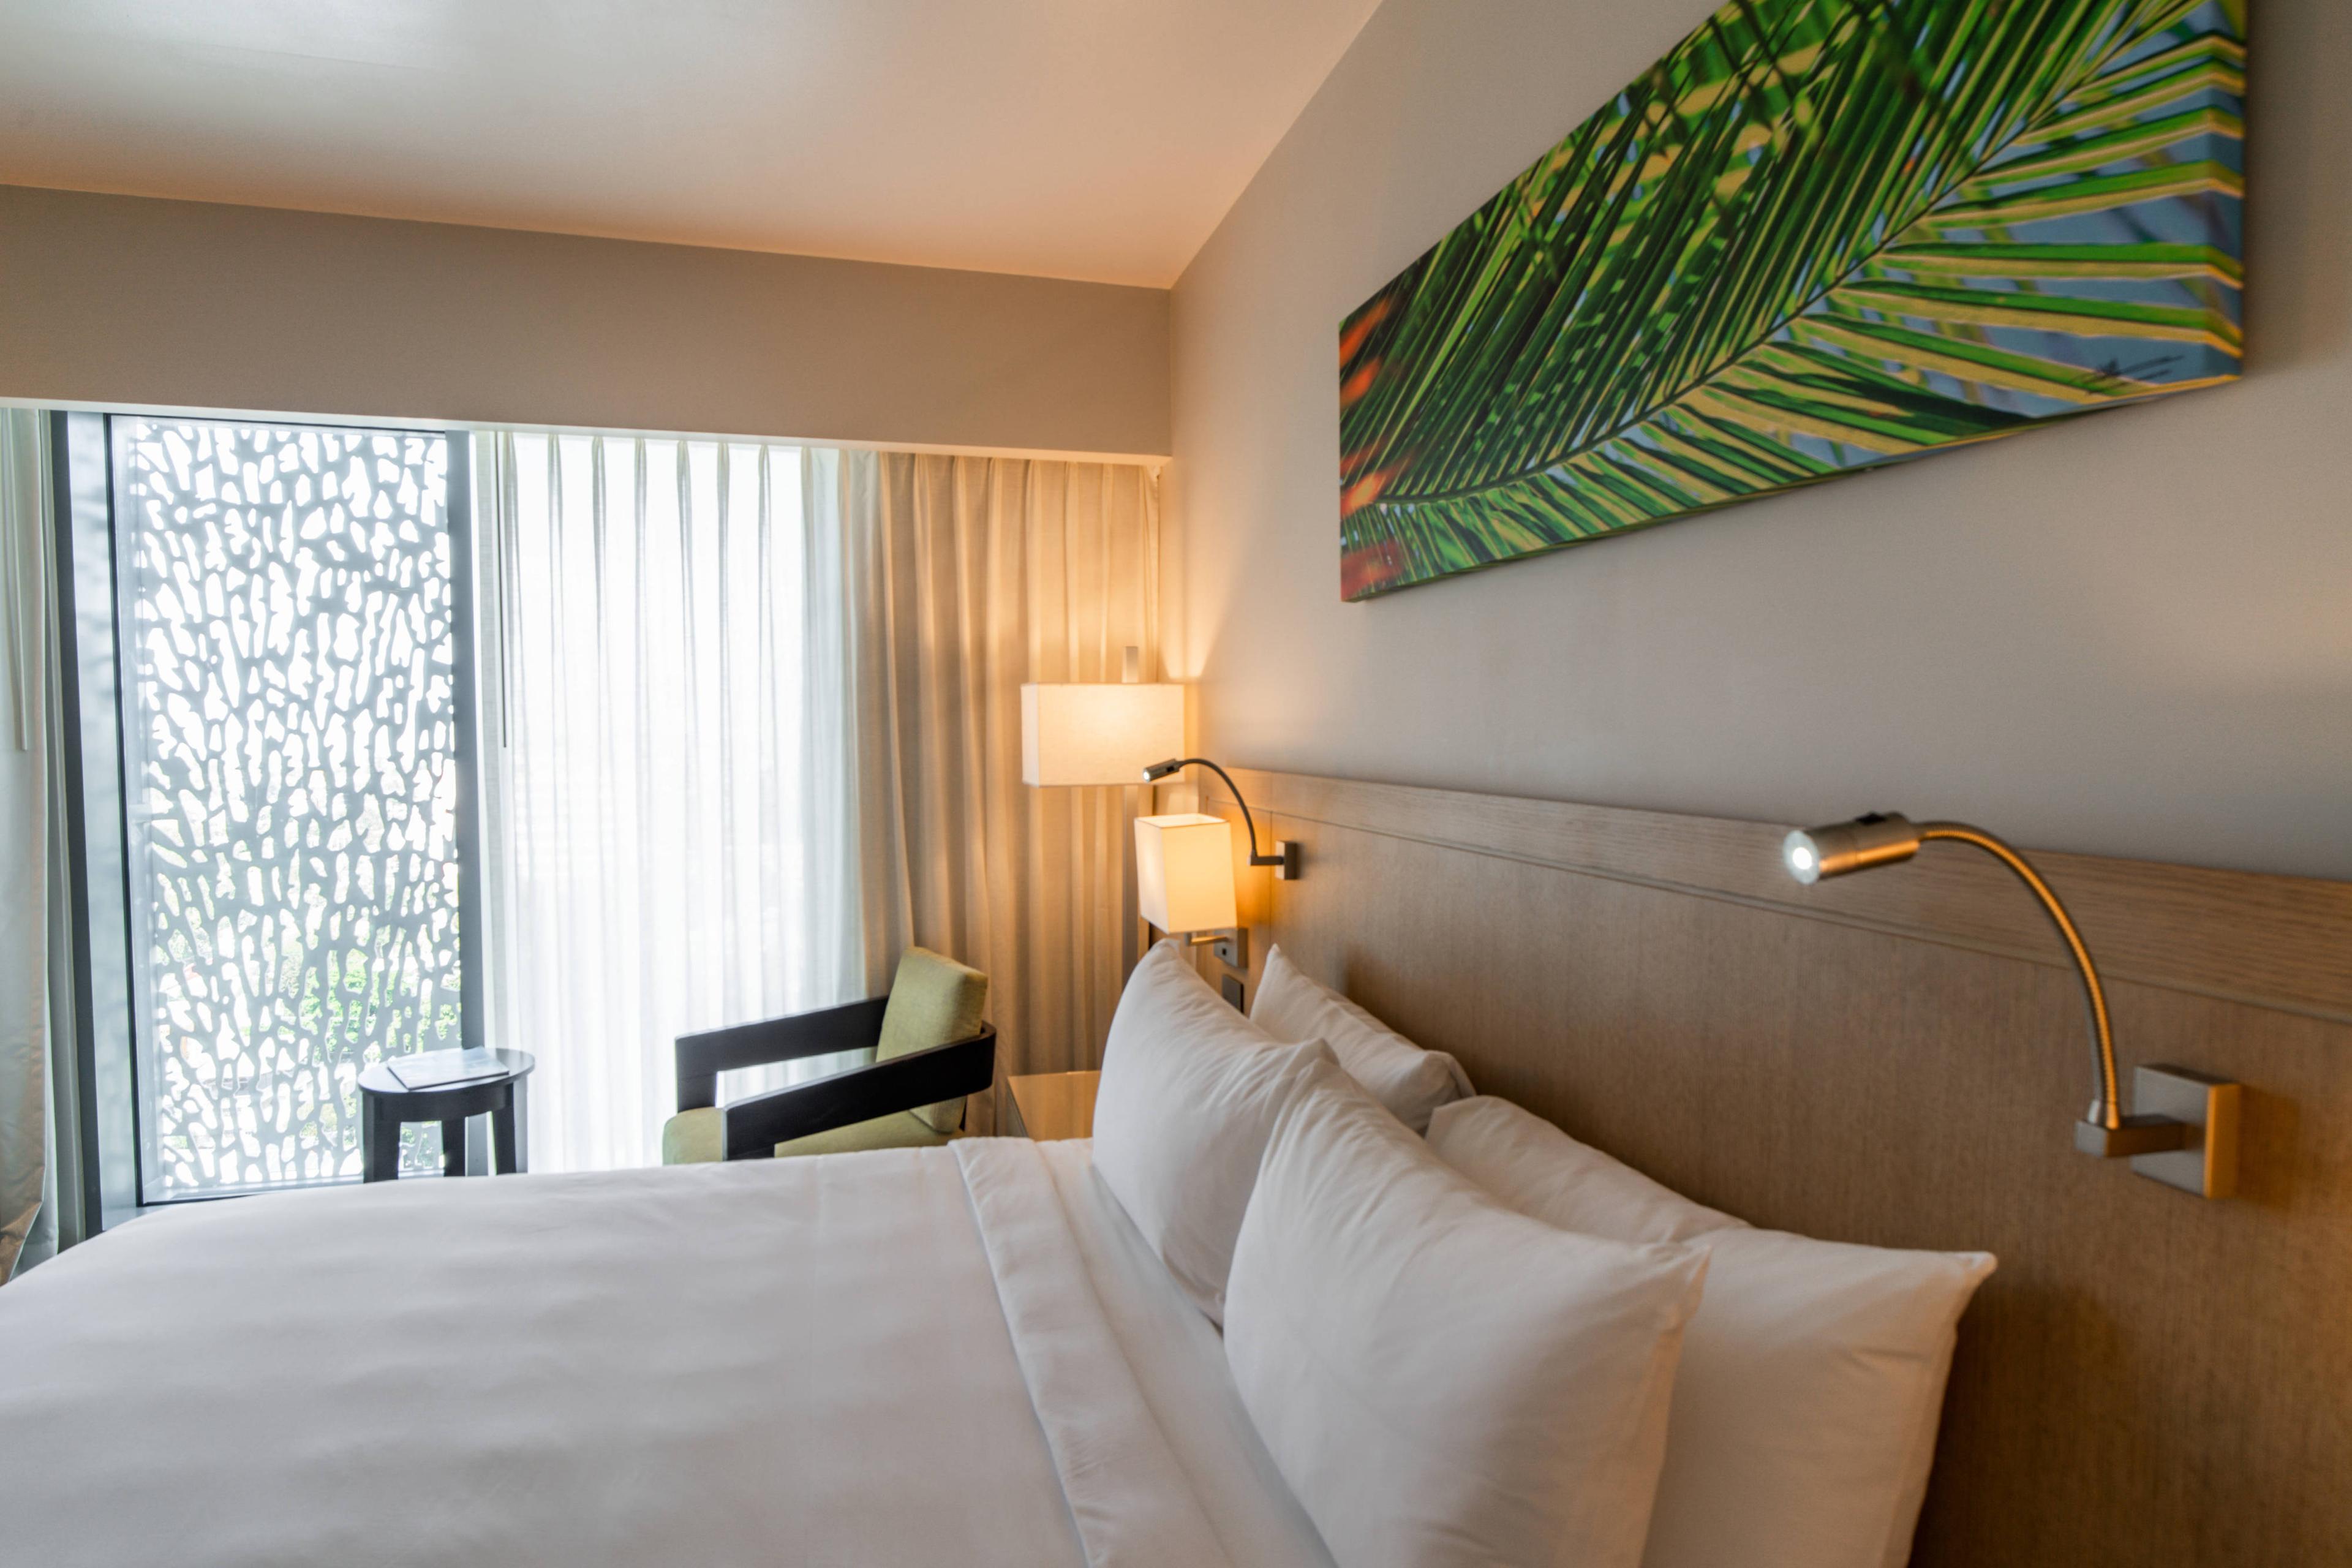 Our well appointed guestrooms will guarantee a relaxing night of sleep in a modern, comfortable setting